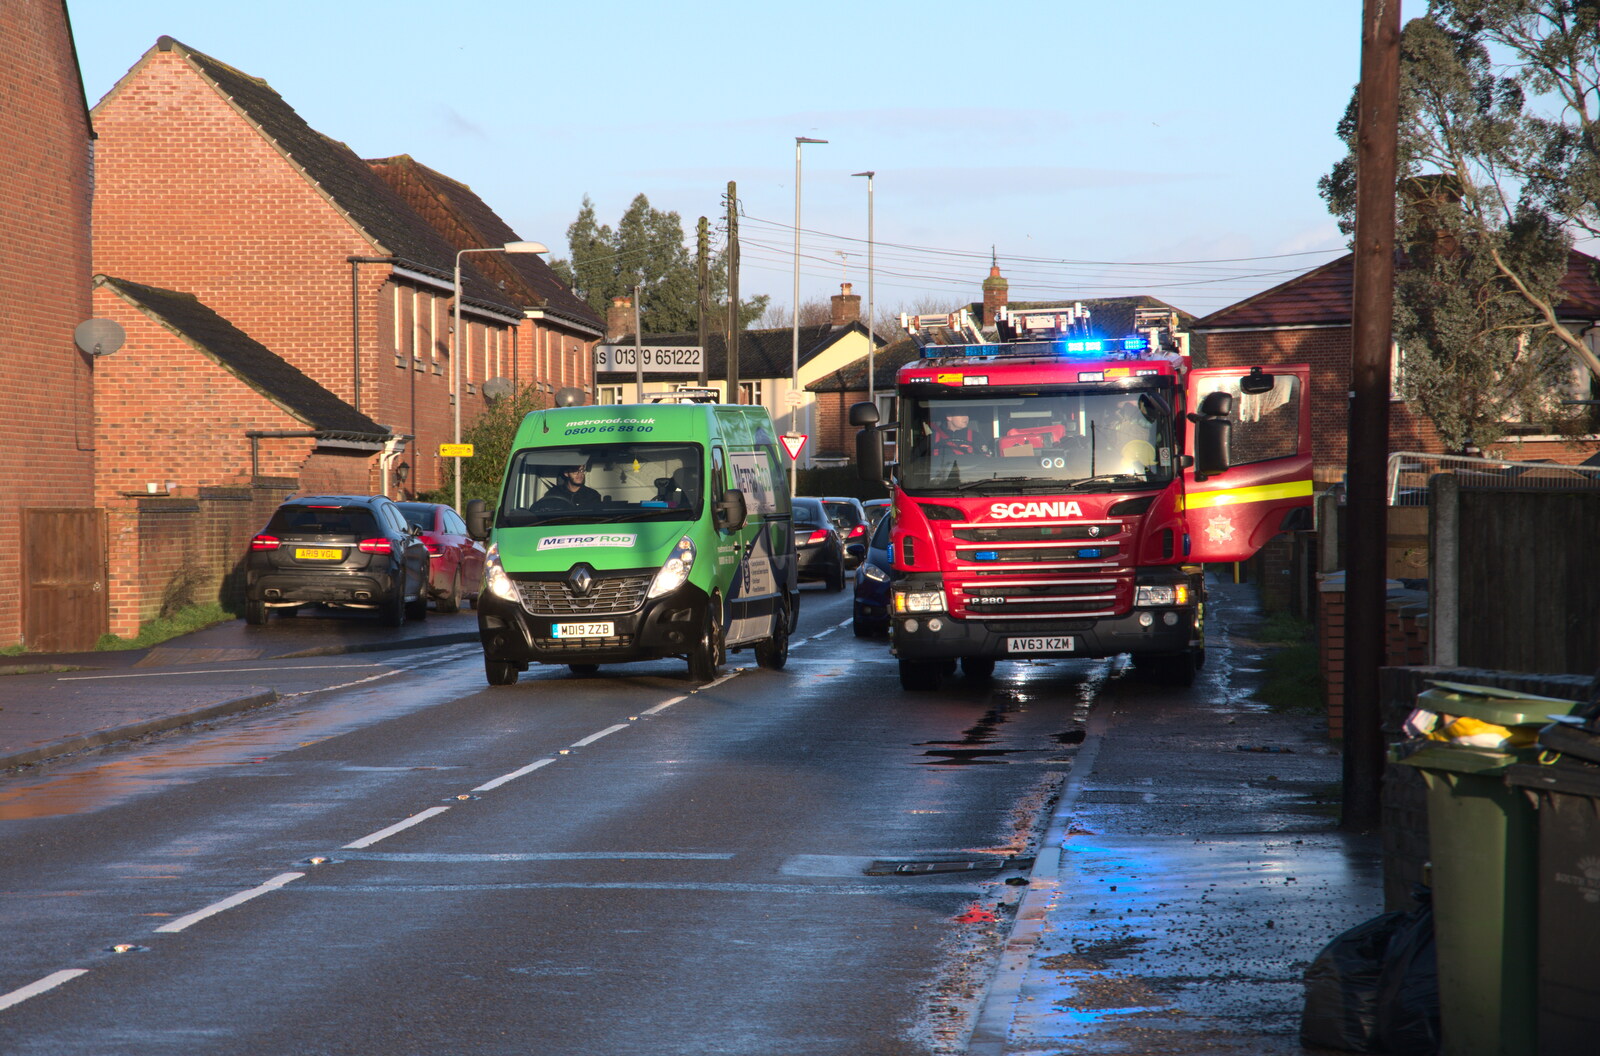 The fire engine is partly blocking the road from The Christmas Eve Floods, Diss, Norfolk - 24th December 2020